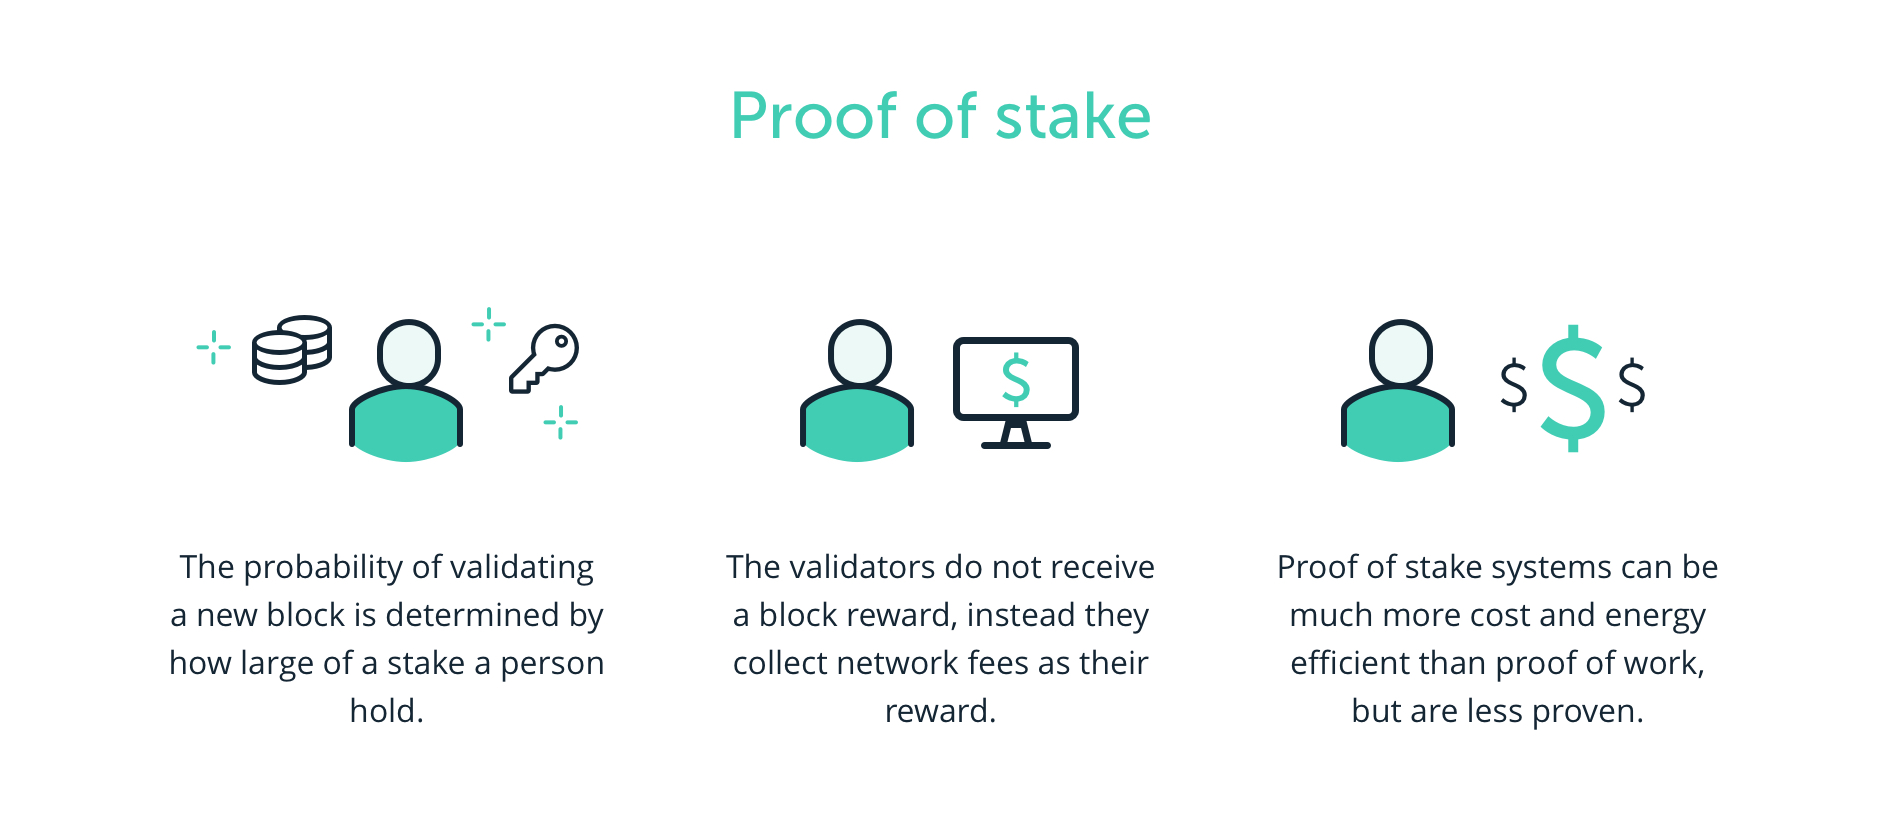 7 Most Profitable Proof Of Stake (POS) Cryptocurrencies